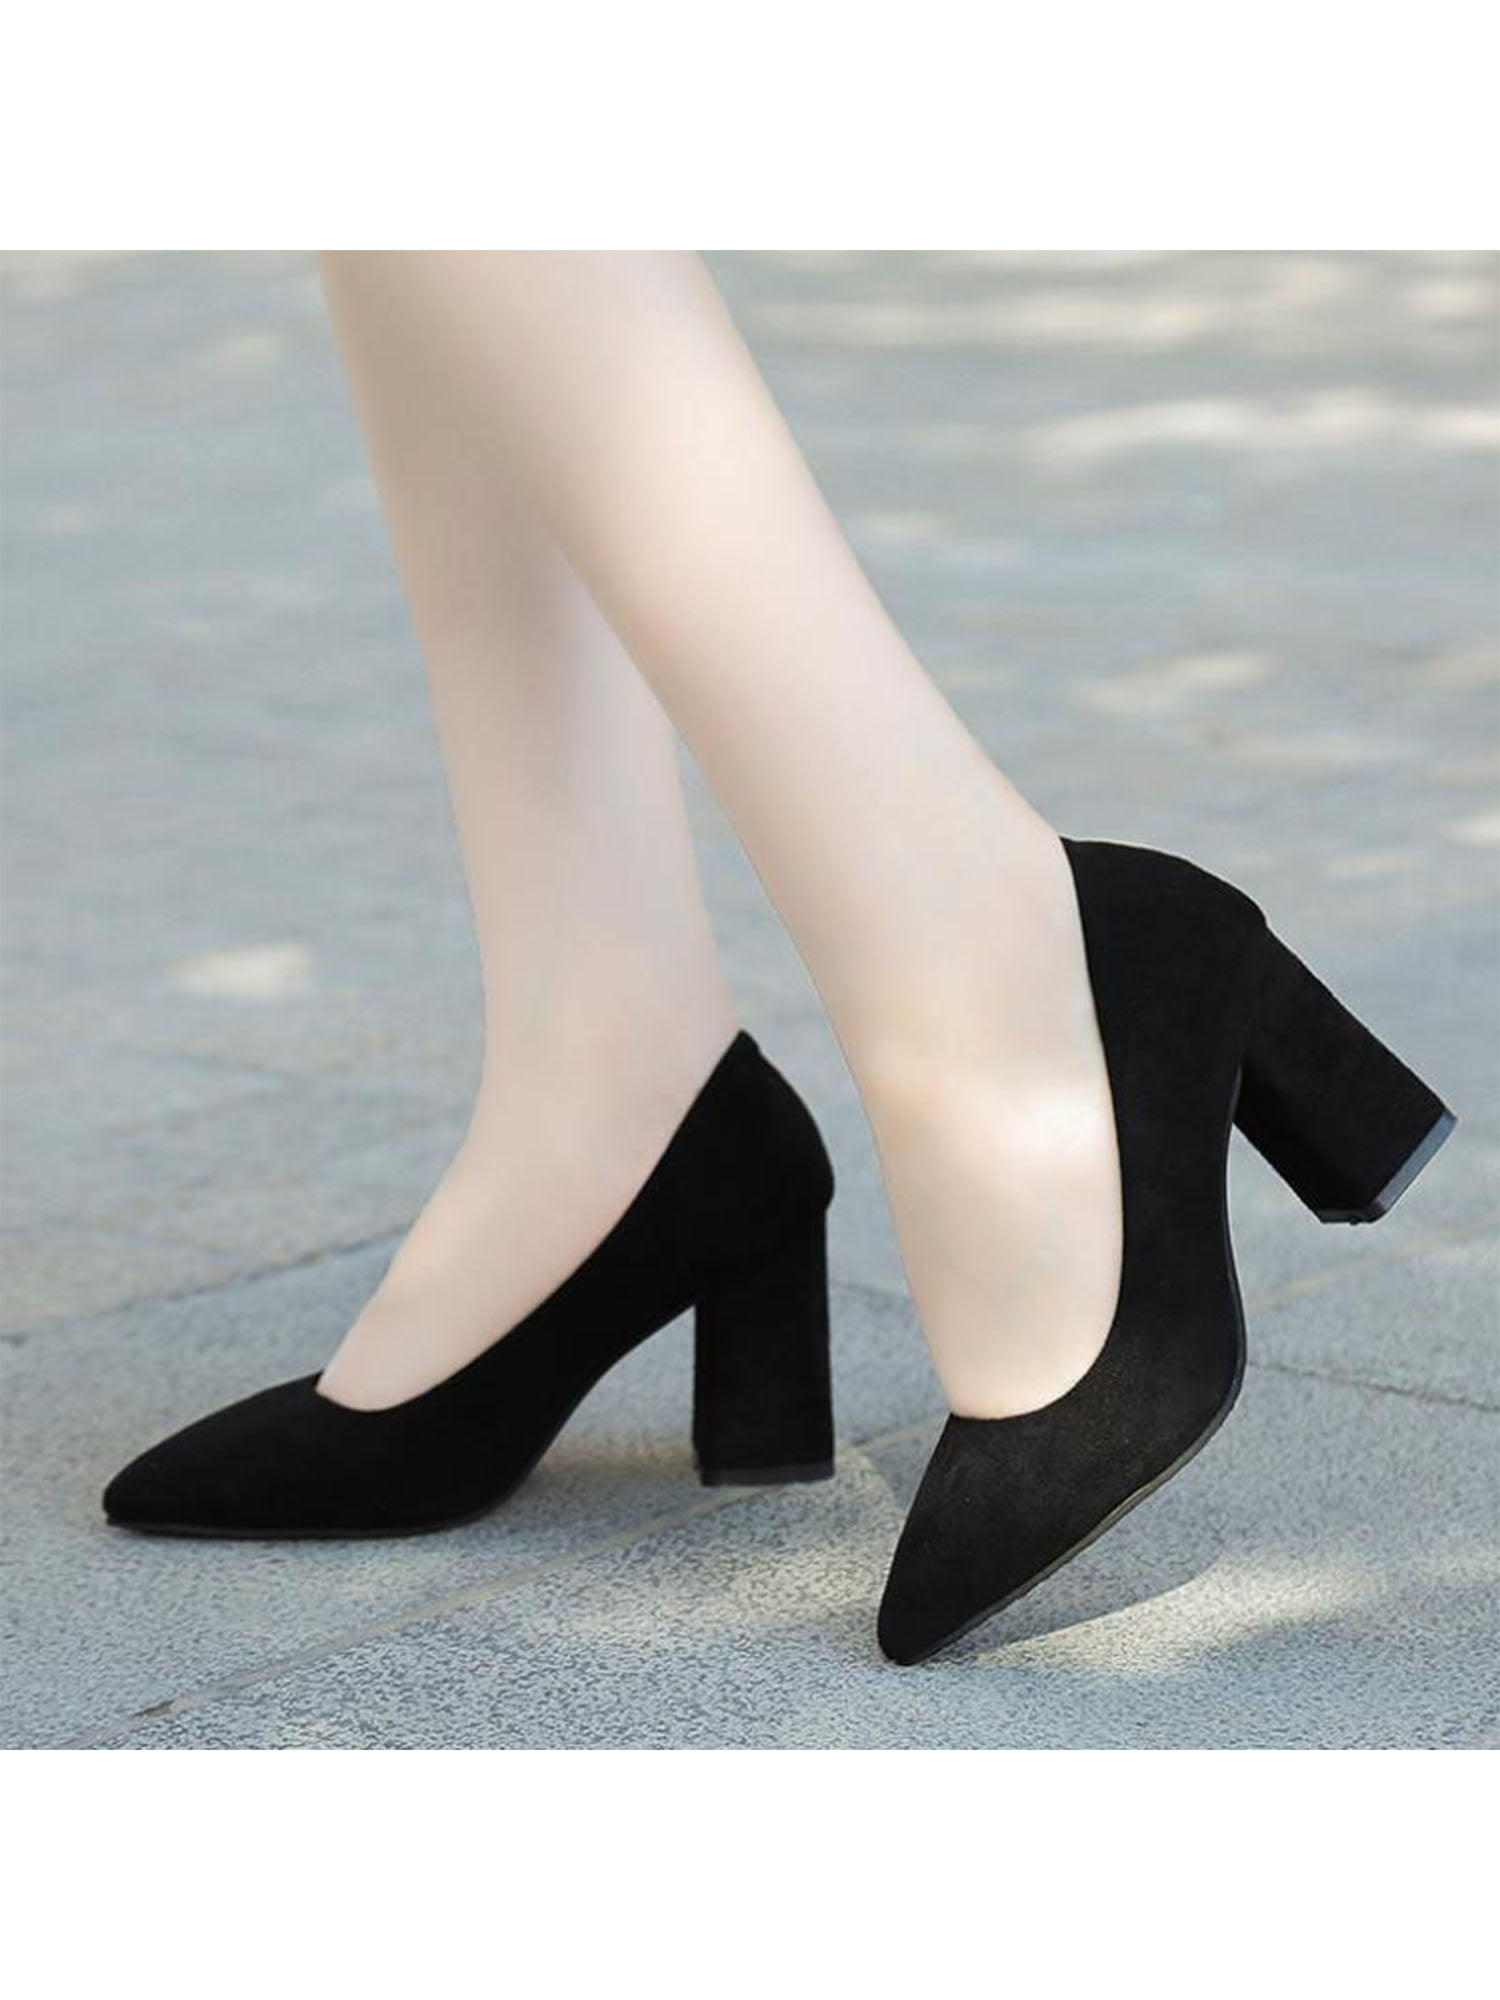 Details about   Womens Mid Kitten Heels Pump Shoes Pointed Toe OL Work Business Shoes Slip On 